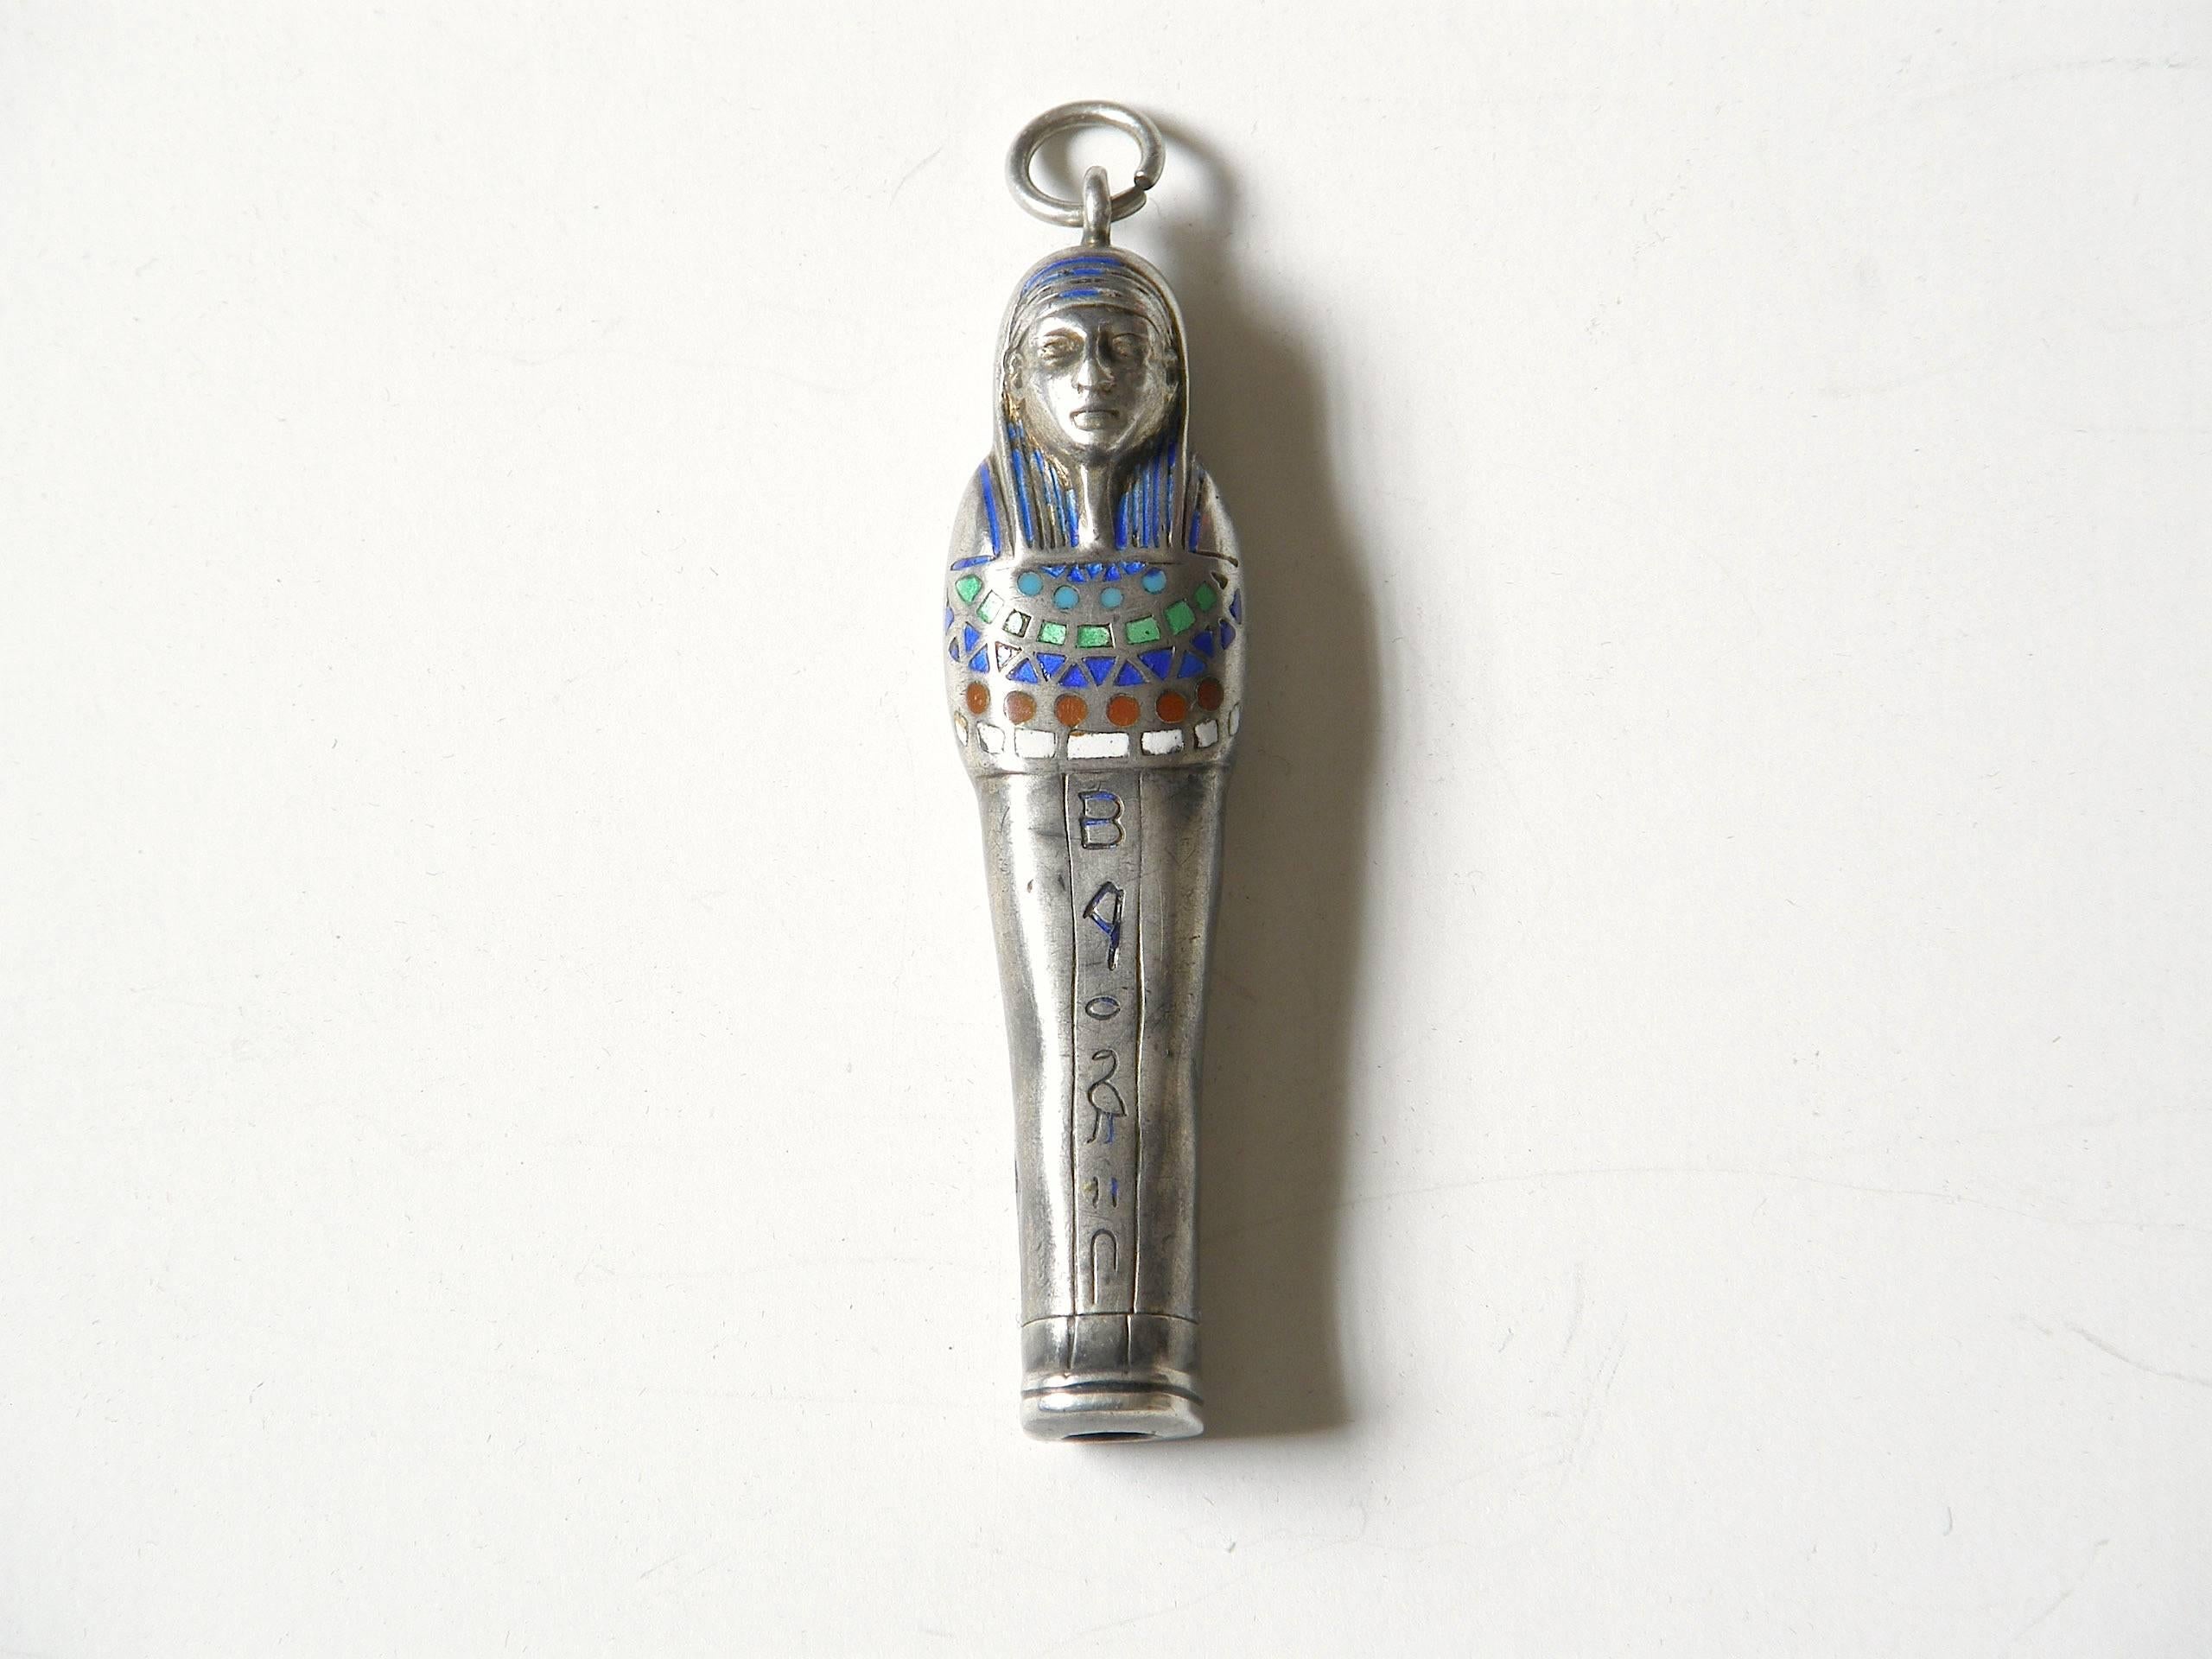 This mummy / sarcophagus shaped pendant has a retractable pencil inside. It's the kind of mechanical pencil that was often carried as a necklace or chatelain and used for filling out dance cards. This c. 1920s,  Egyptian Revival example is made of